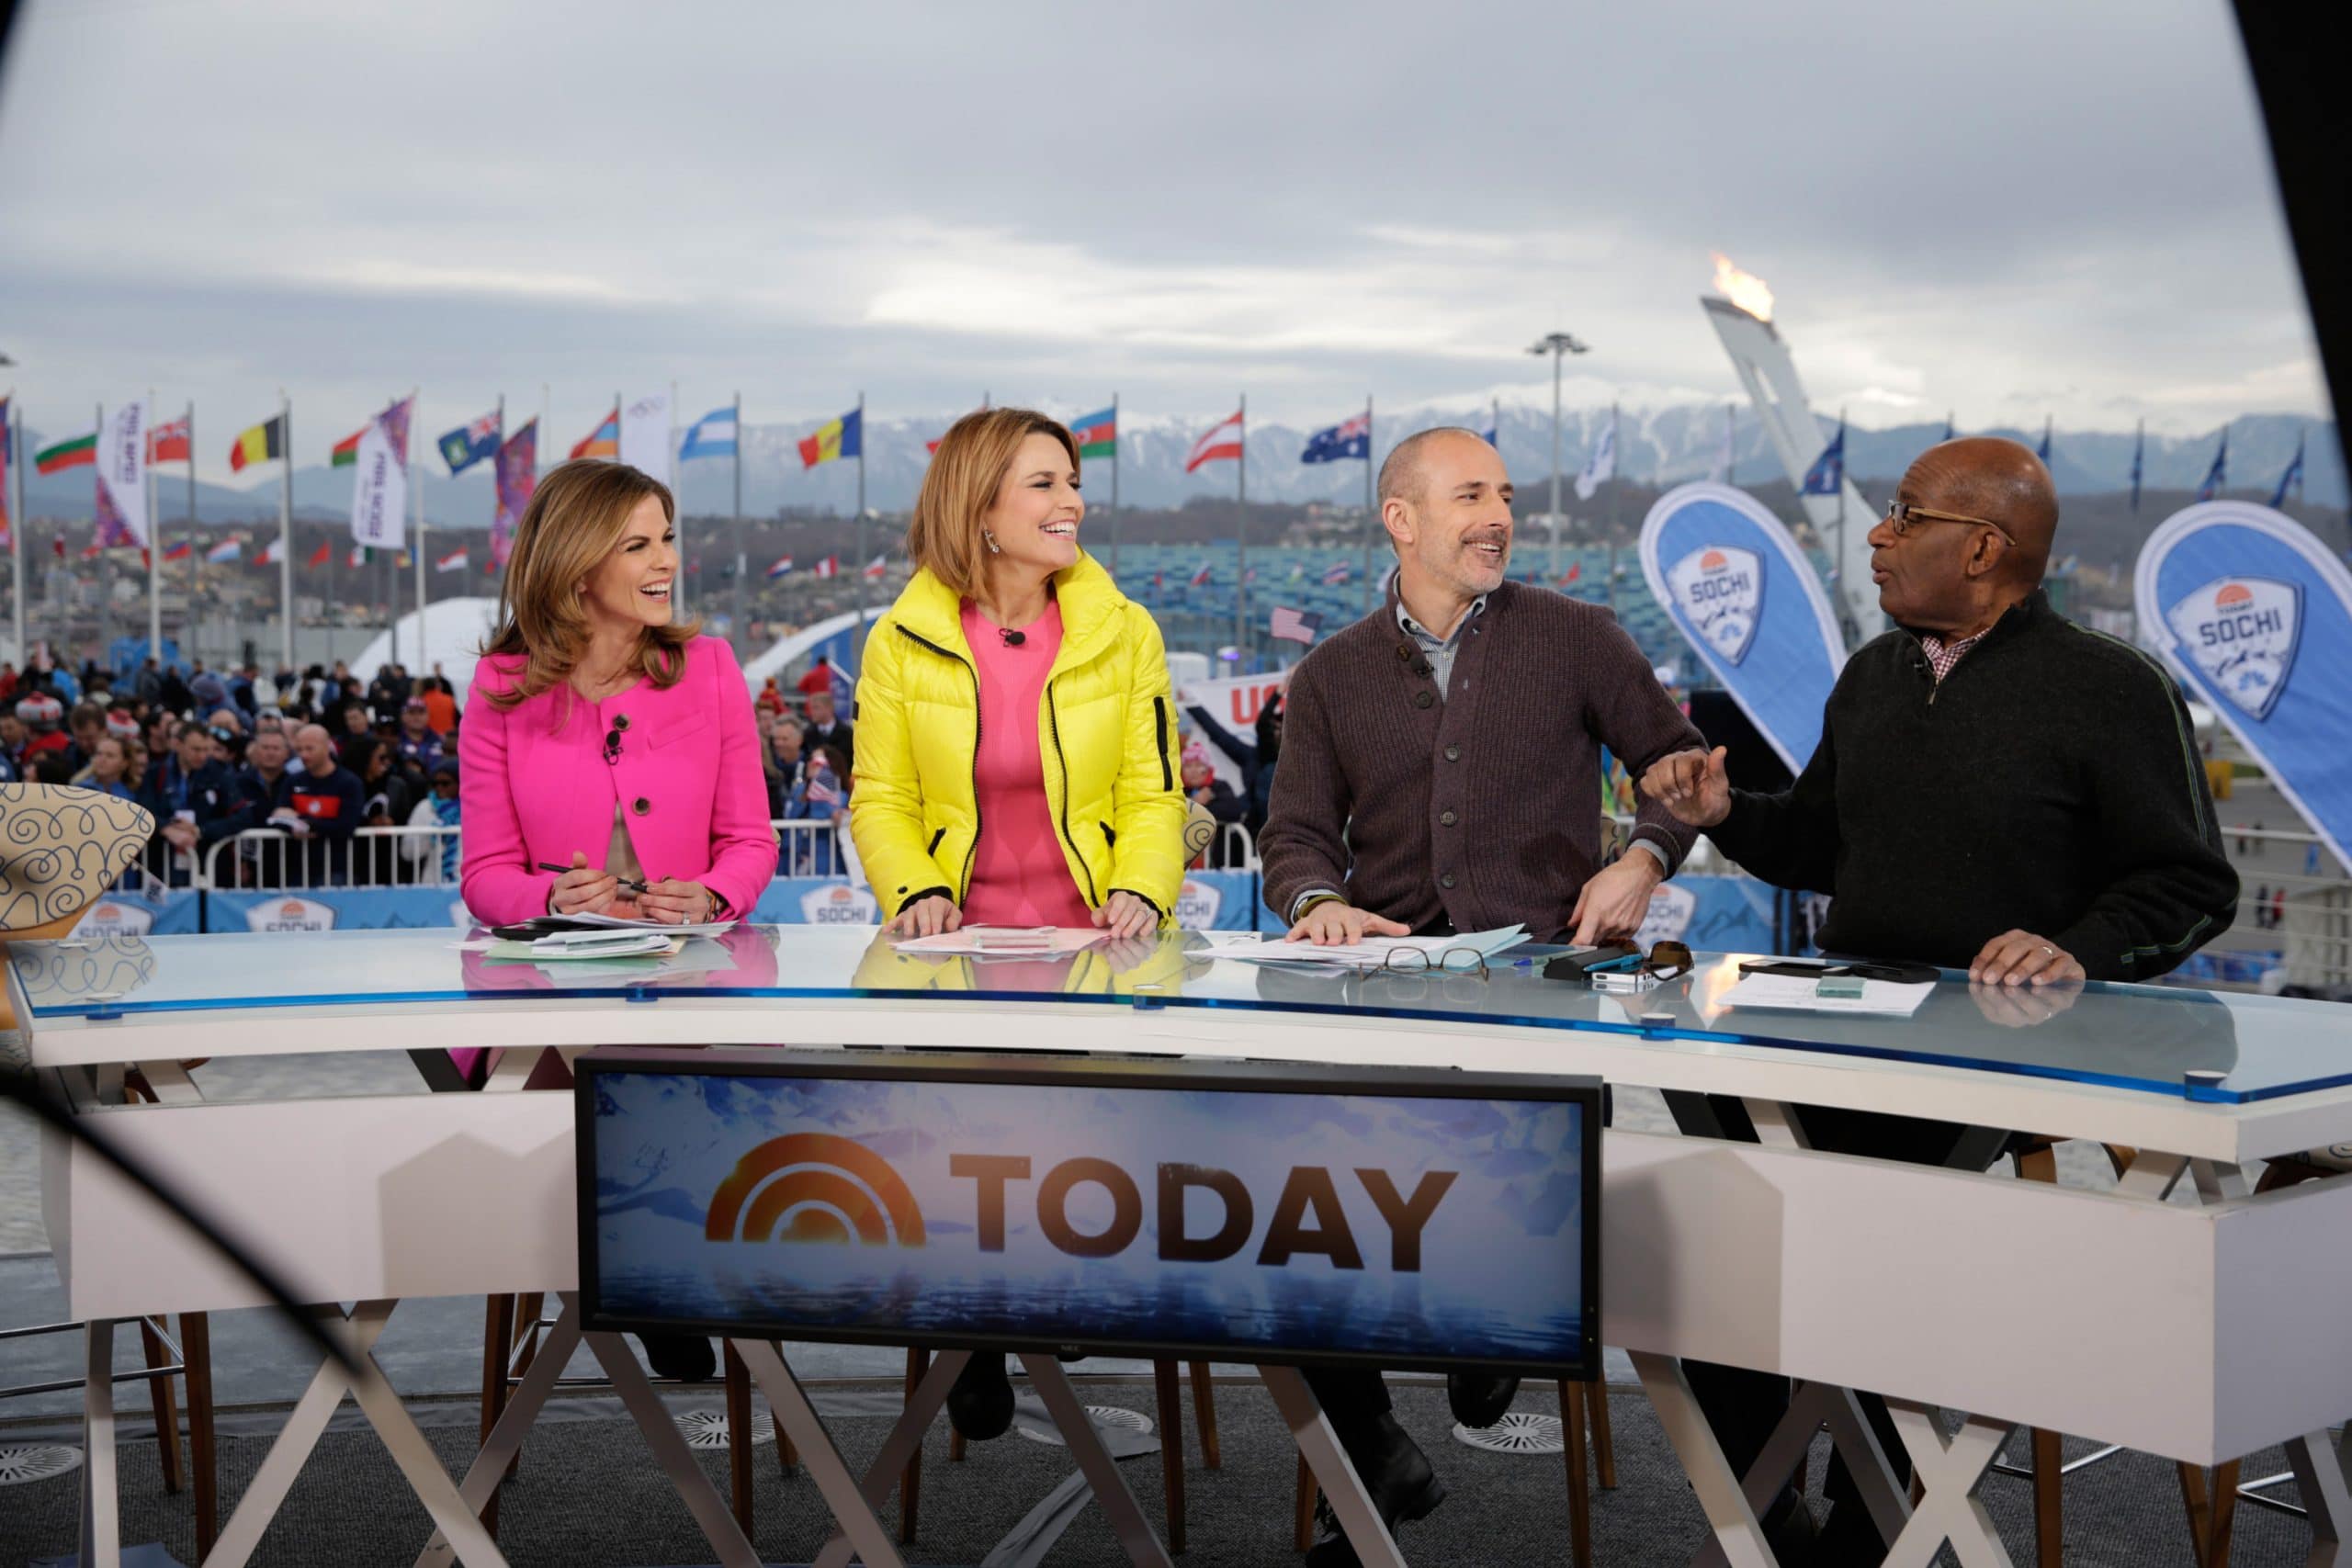 THE TODAY SHOW (aka TODAY), from left: Natalie Morales, Savannah Guthrie, Matt Lauer, Al Roker, (in Sochi Russia at the 2014 Winter Olympics)